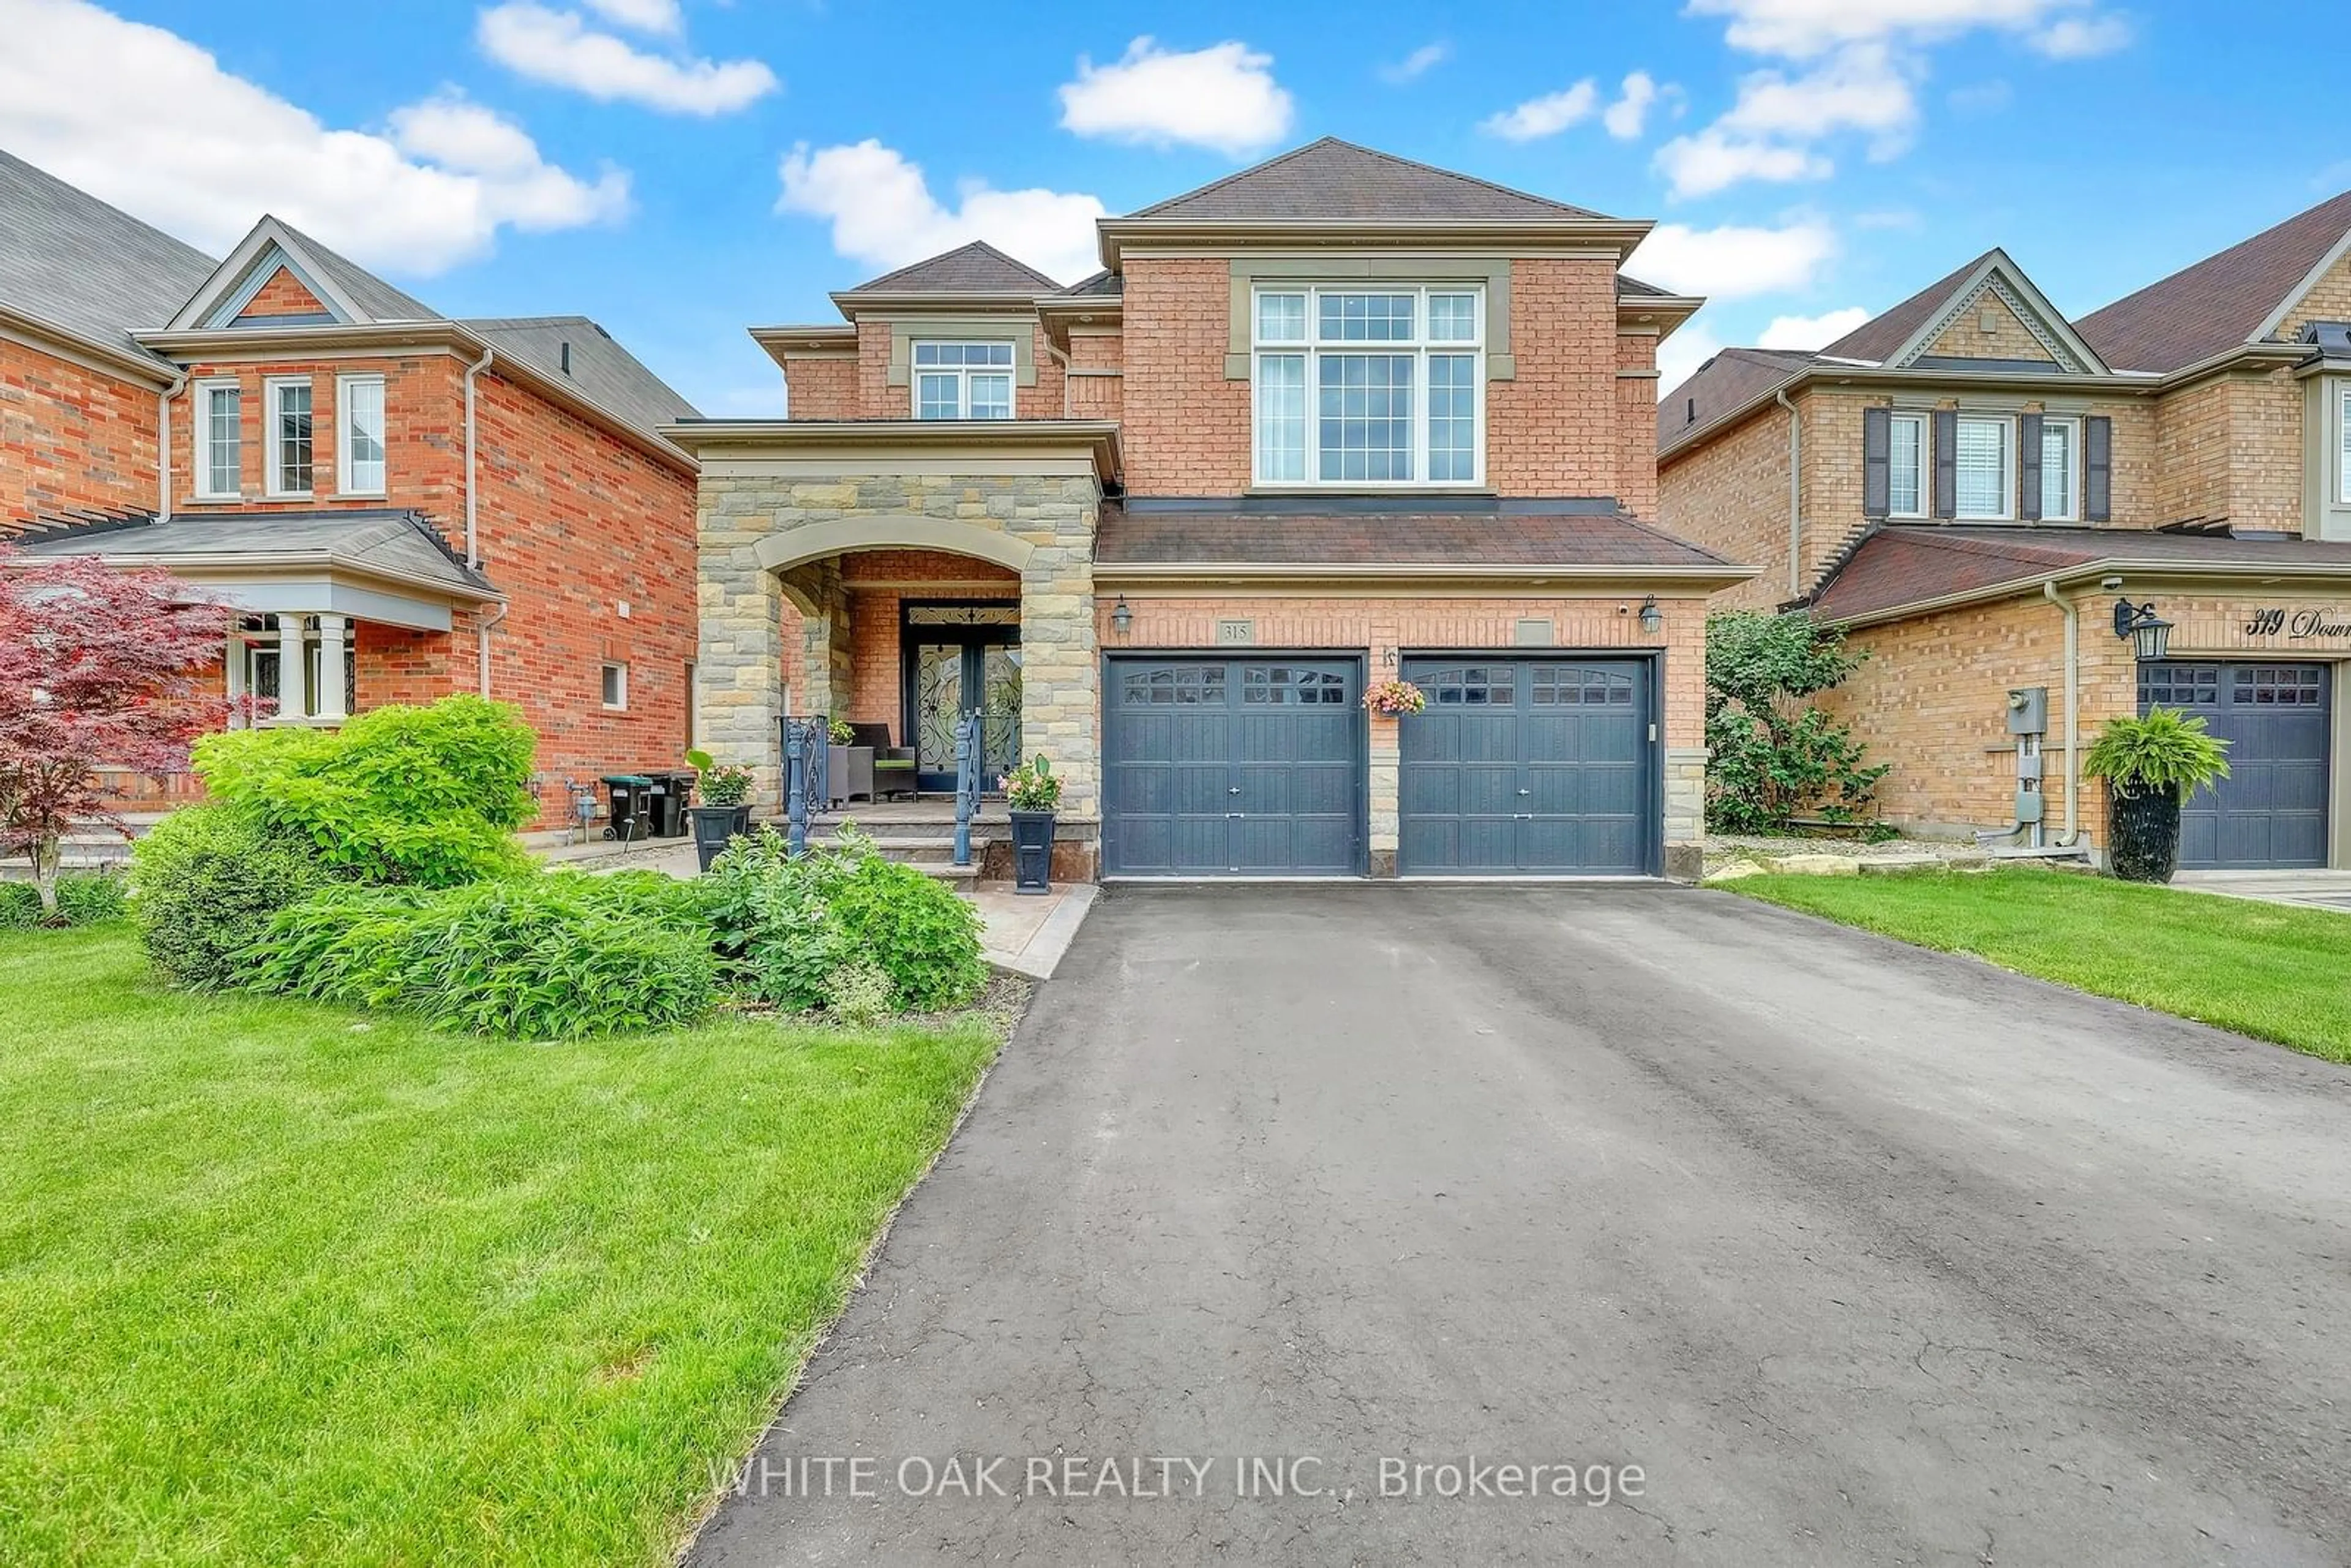 Home with brick exterior material for 315 Downy Emerald Dr, Bradford West Gwillimbury Ontario L3Z 0K2